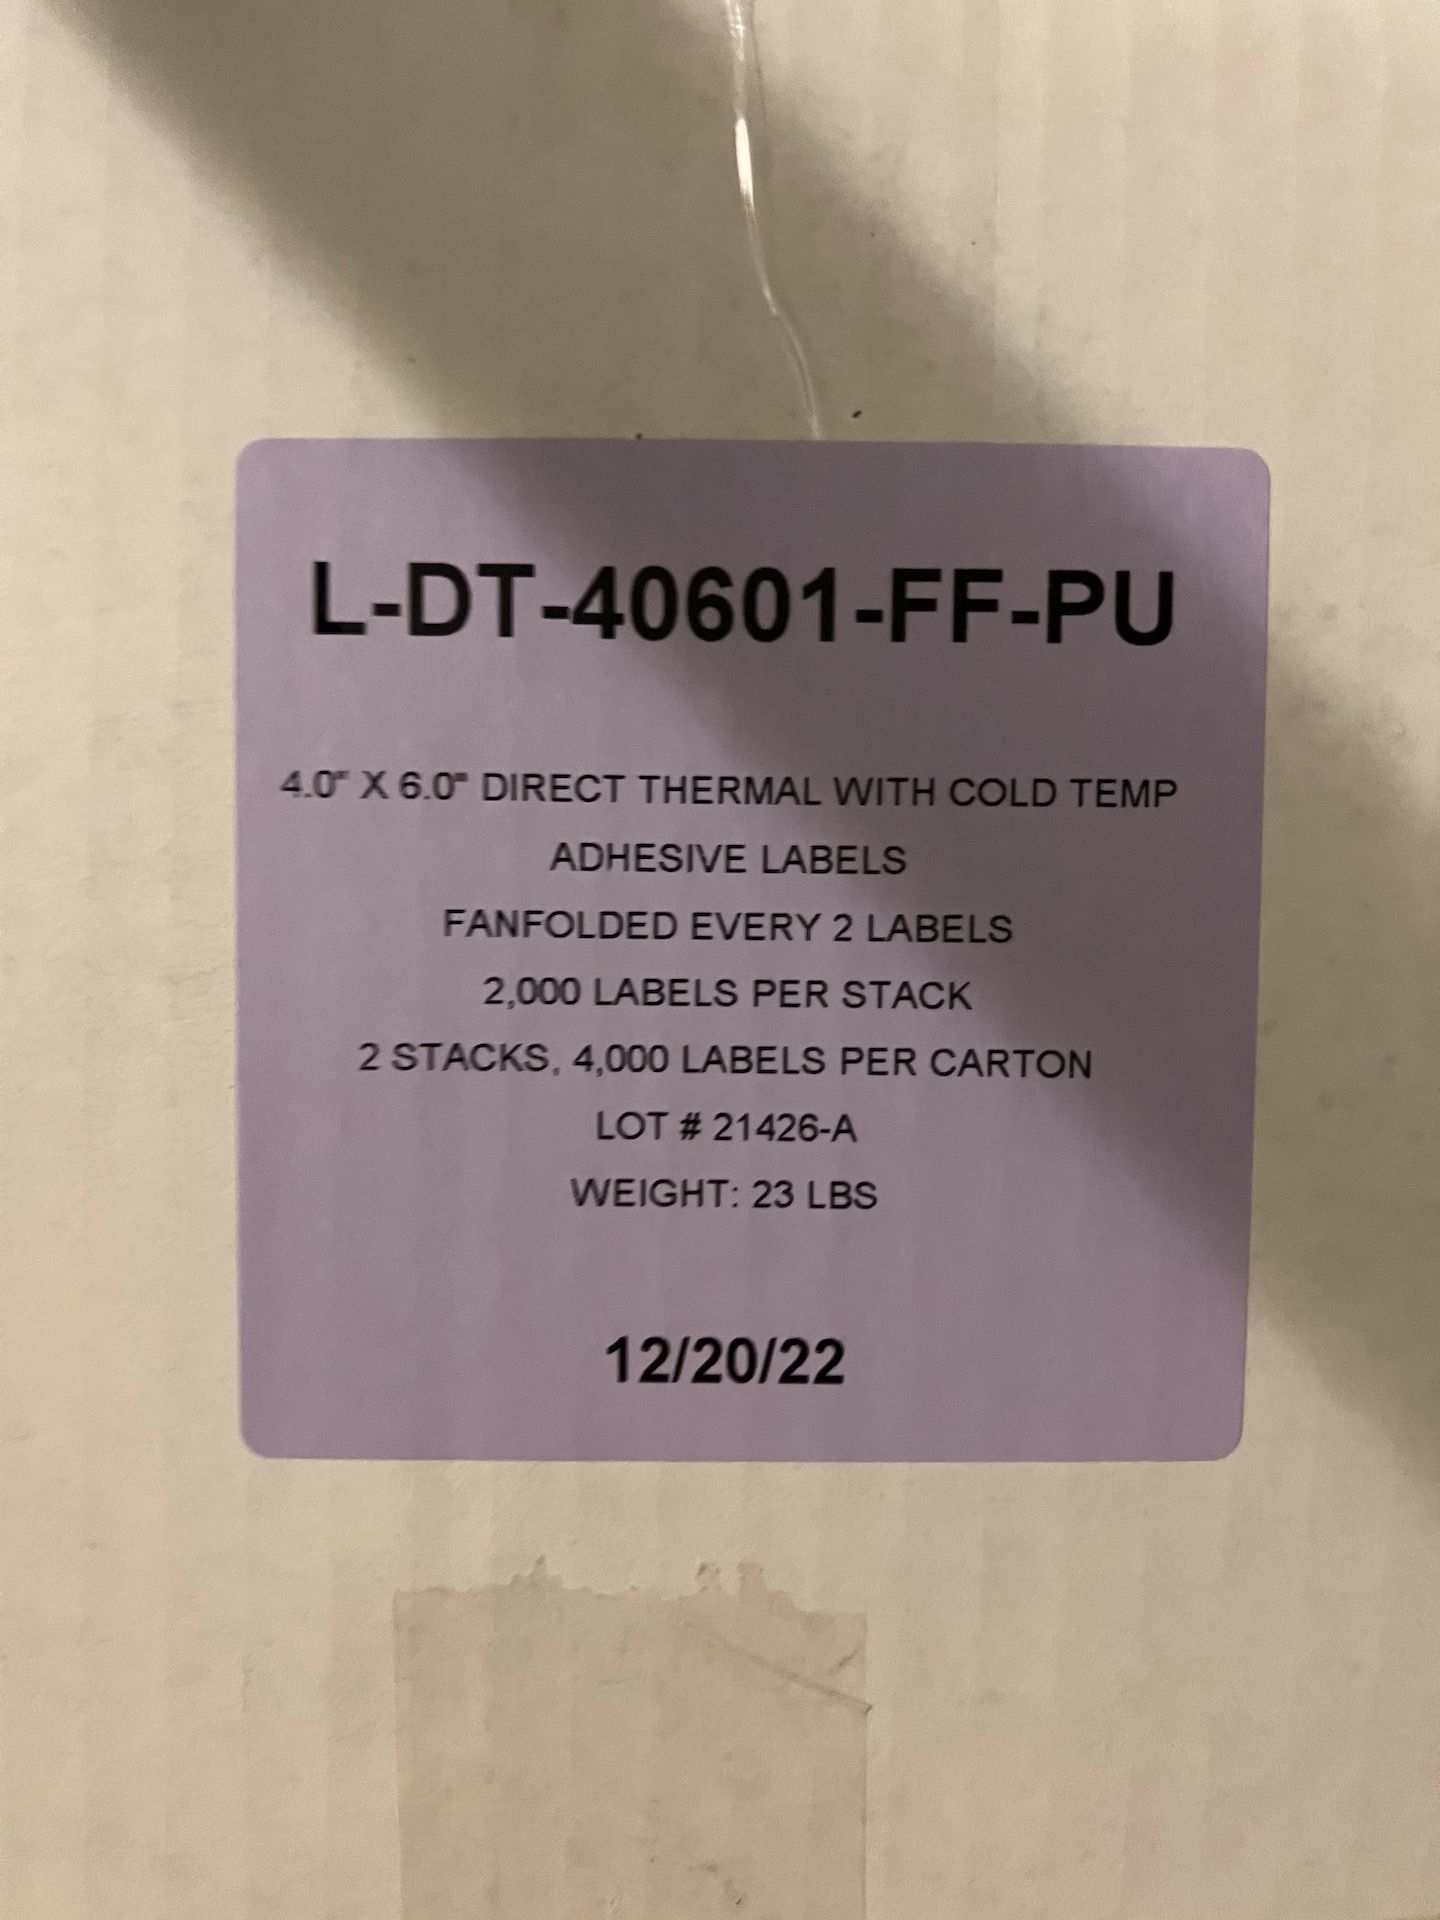 (9) BOXES OF PDIRECT THERMAL WITH CCLD TEMPADHESIVE LABELS, FANFOLDED EVERY 2 LABELS - Image 5 of 6